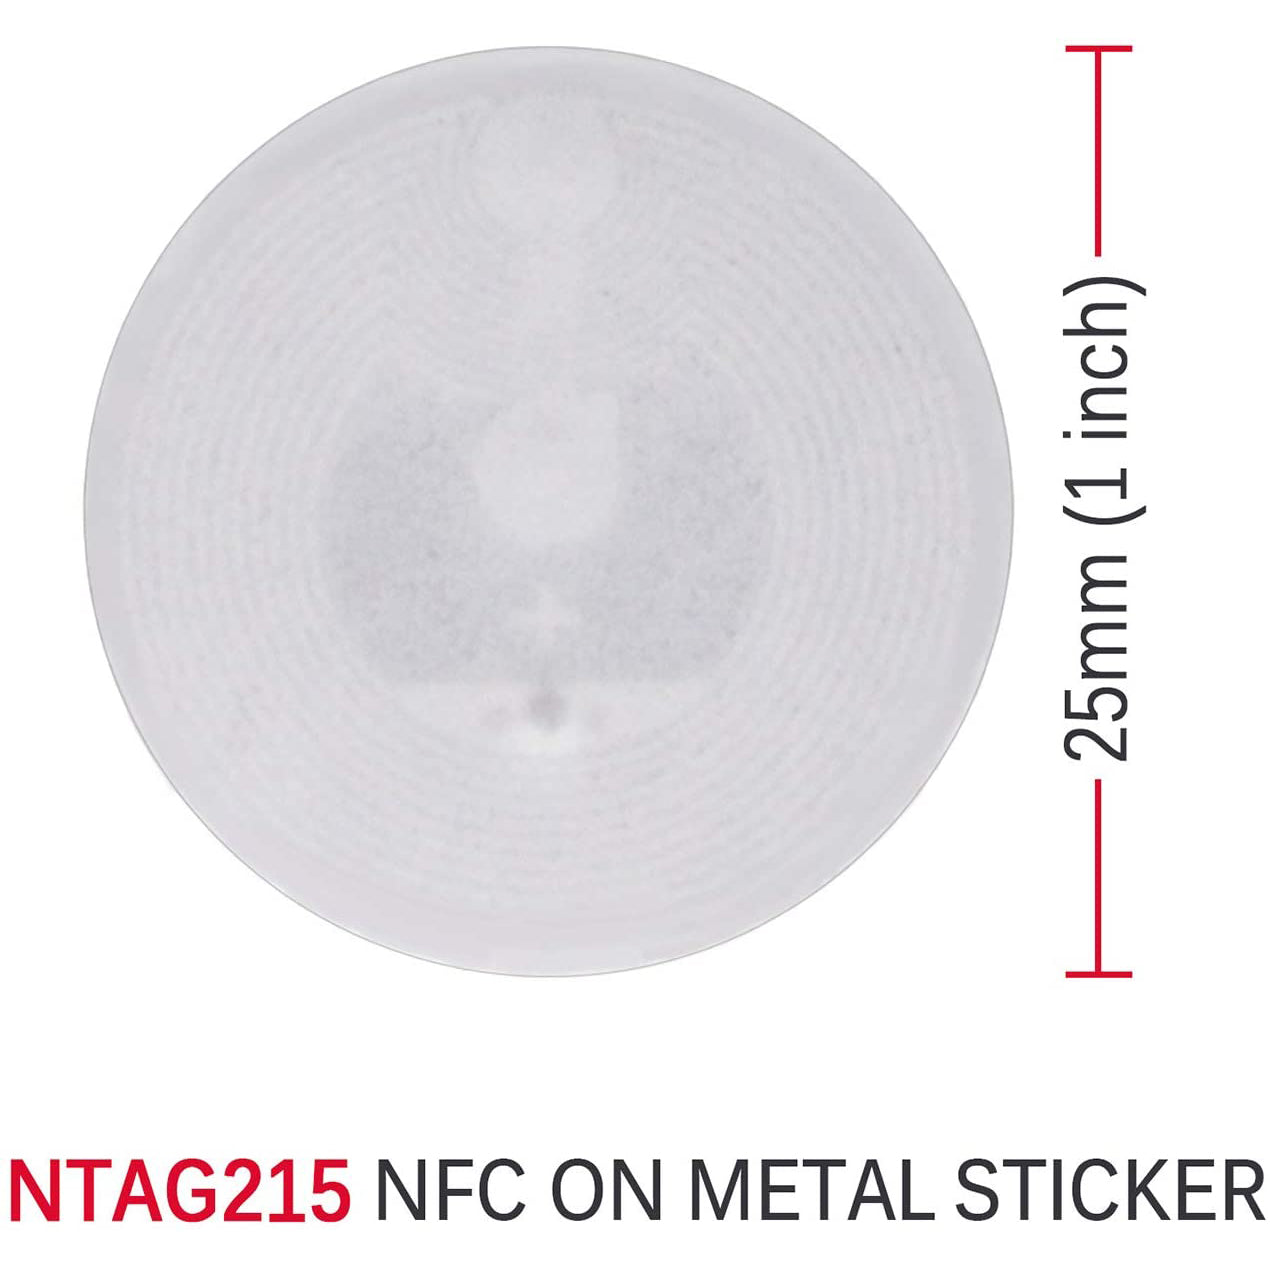 20pcs NFC Tags Anti-Metal NFC Tags NTAG215 NFC Stickers Anti Metal NFC Tag On-Metal NFC Tags Sticker,Works with TagMo (Android) and Placiibo (iOS)